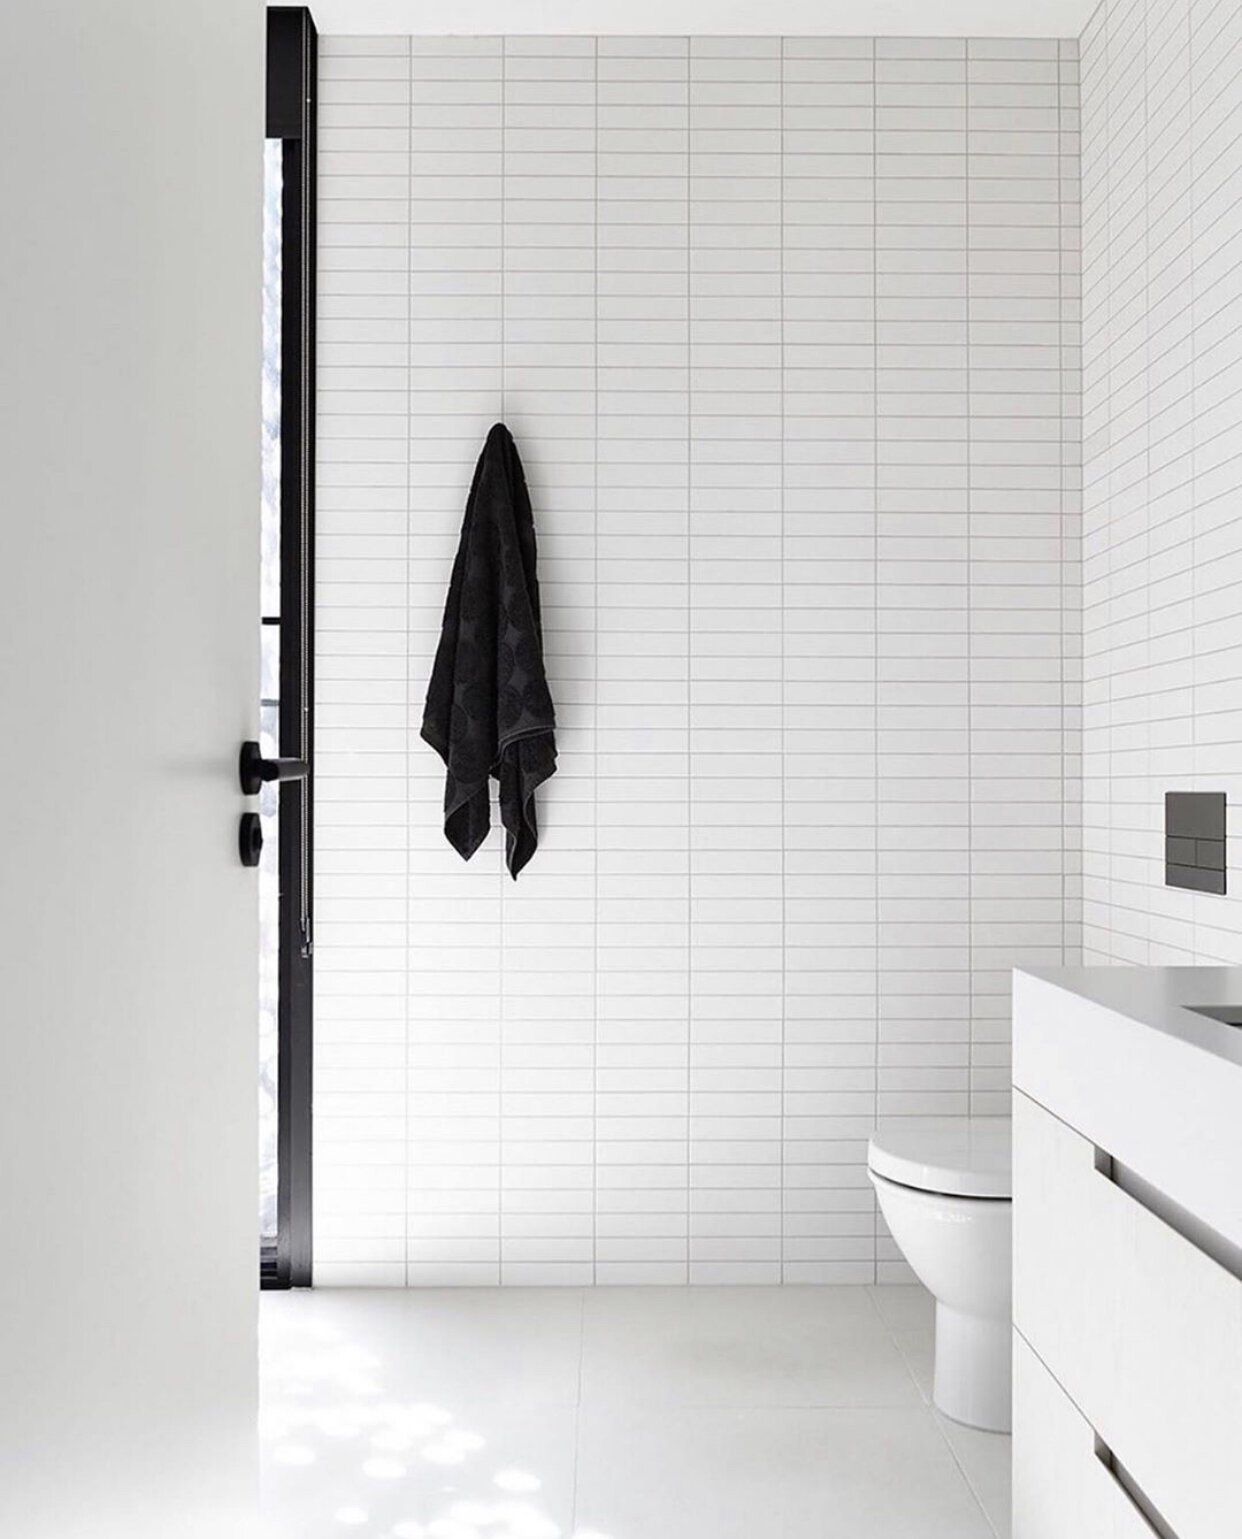 White bathroom kitkat tiles with a straight pattern are installed horizontally for a minimal bathroom design